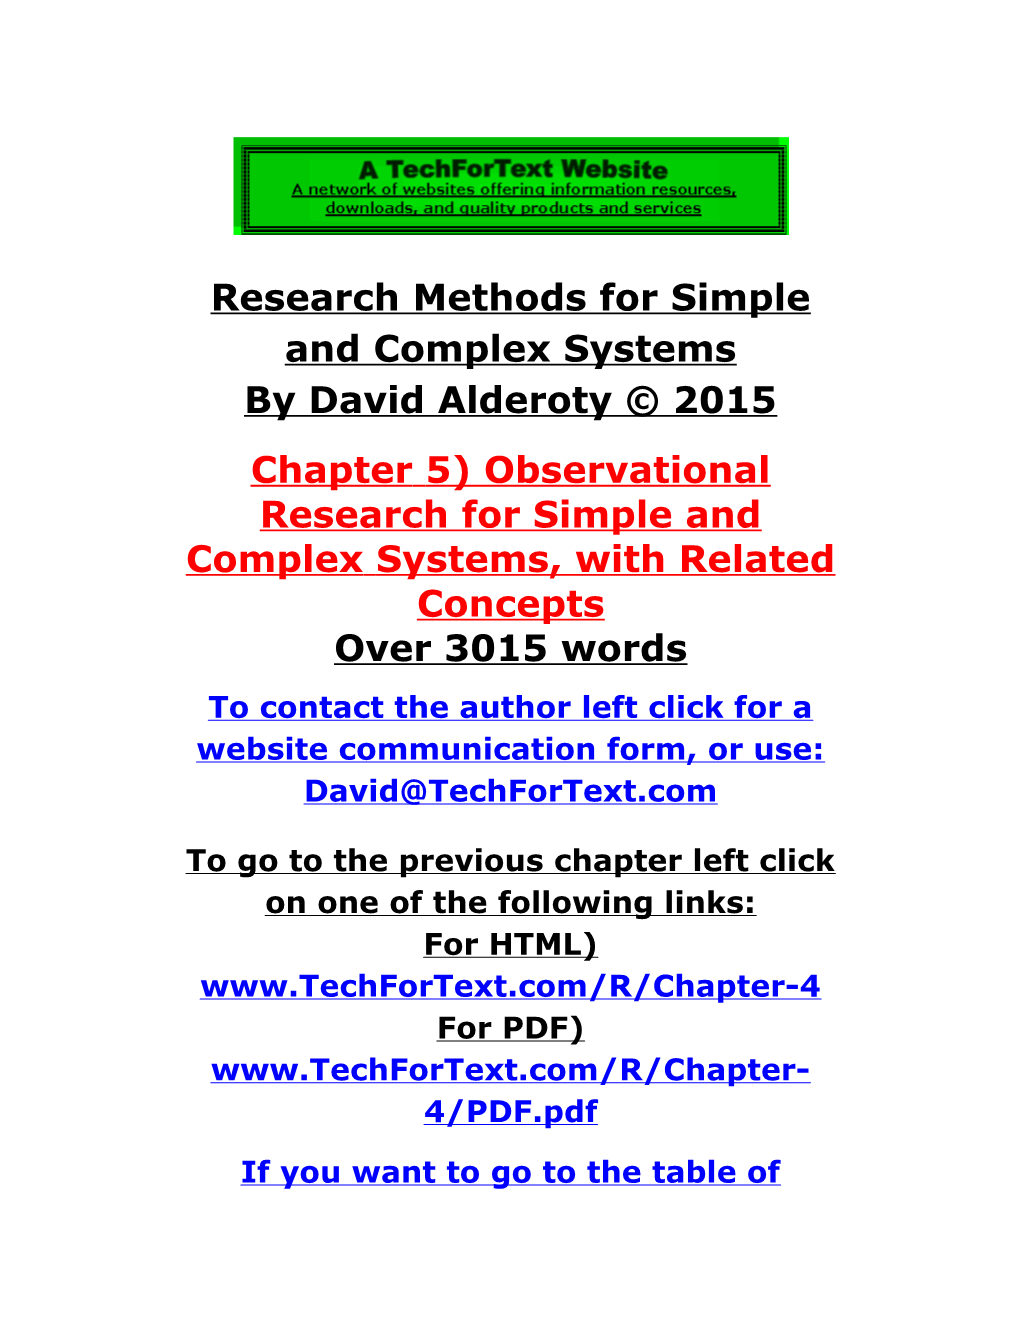 Observational Research for Simple and Complex Systems, with Related Concepts